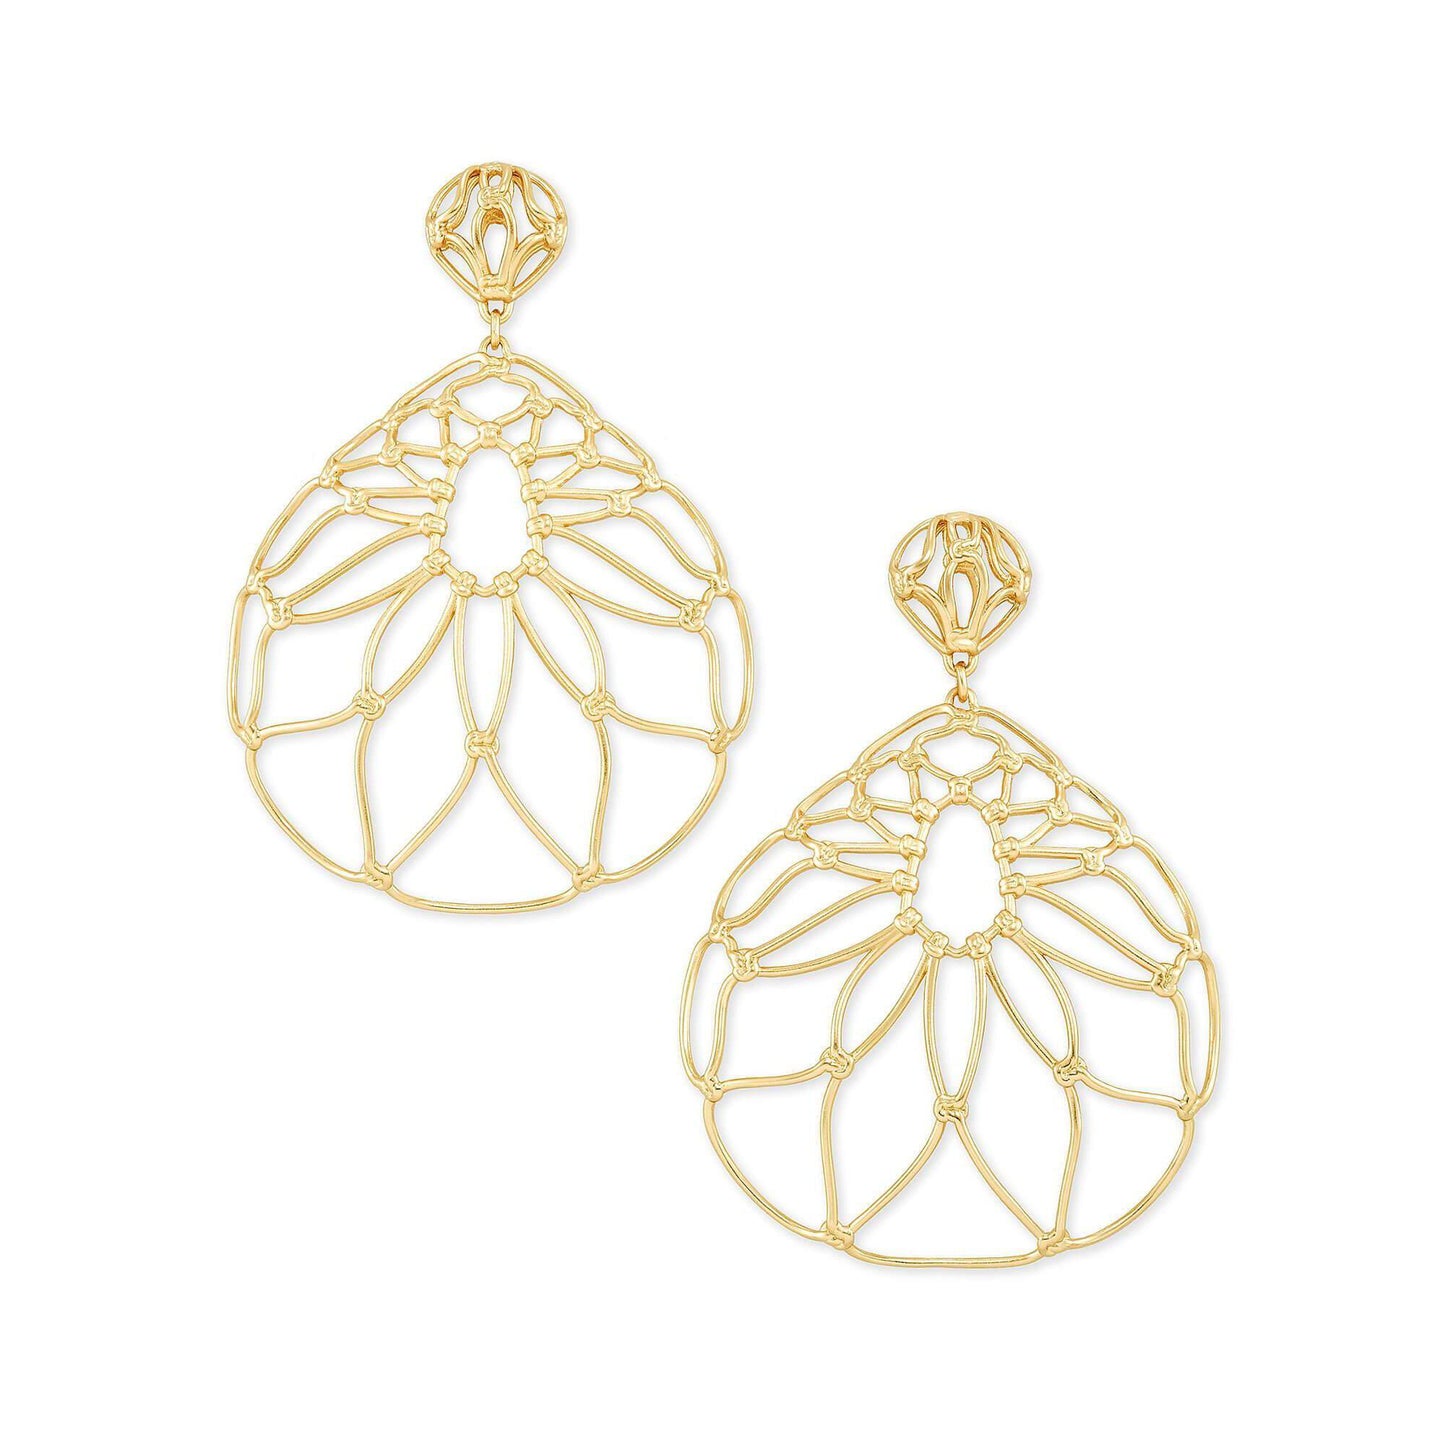 Hallie statement earring in Gold metal